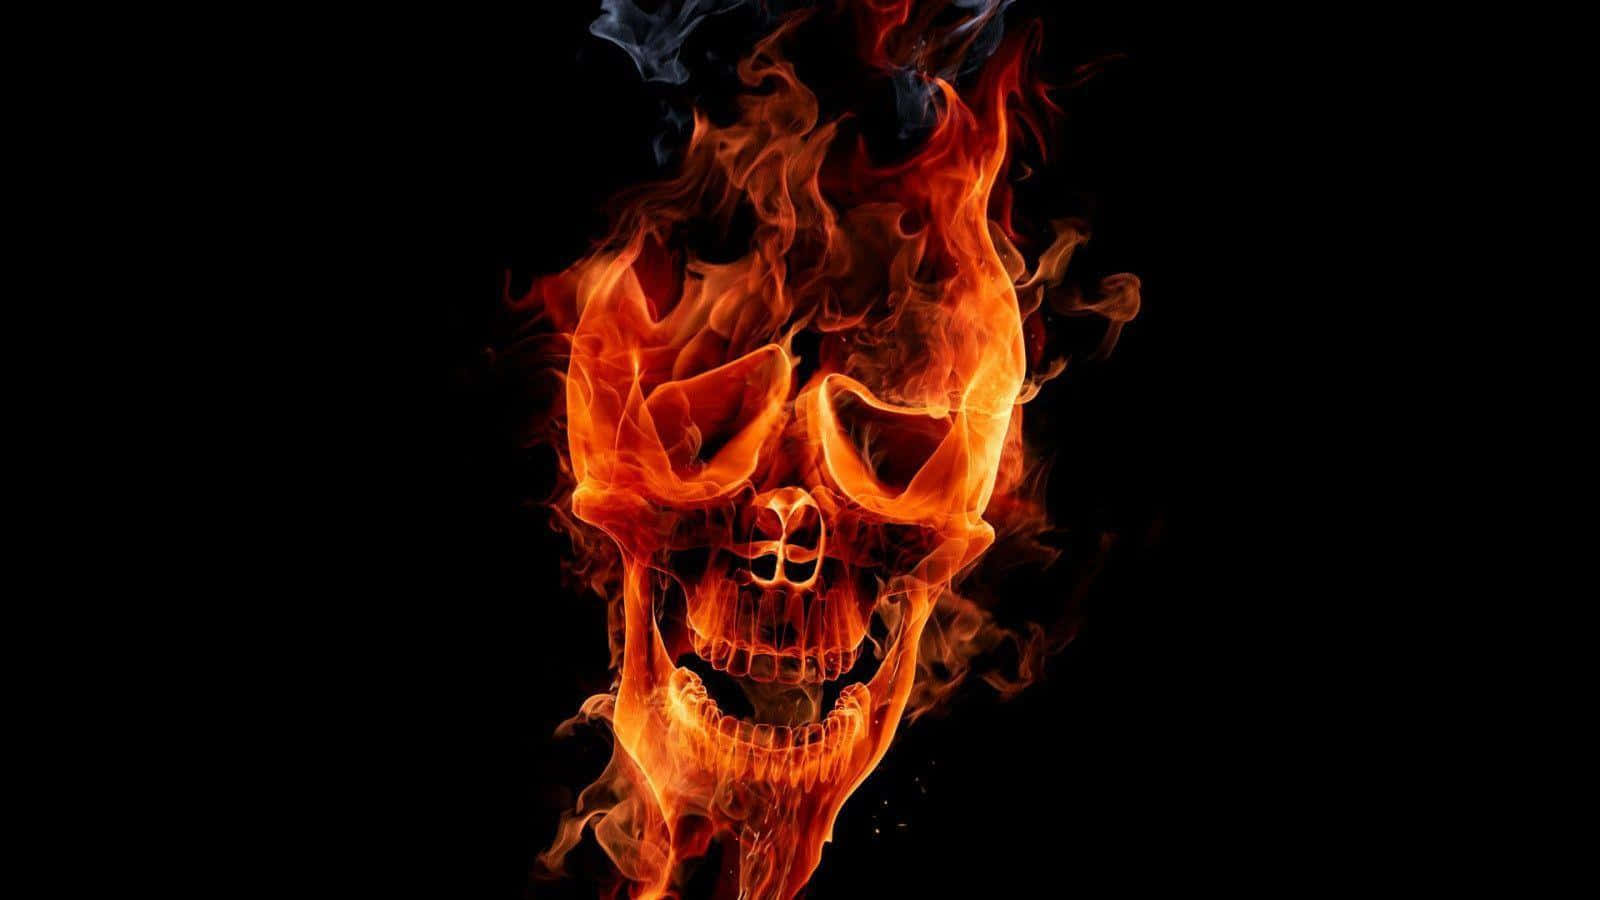 A Skull With Flames On A Black Background Wallpaper